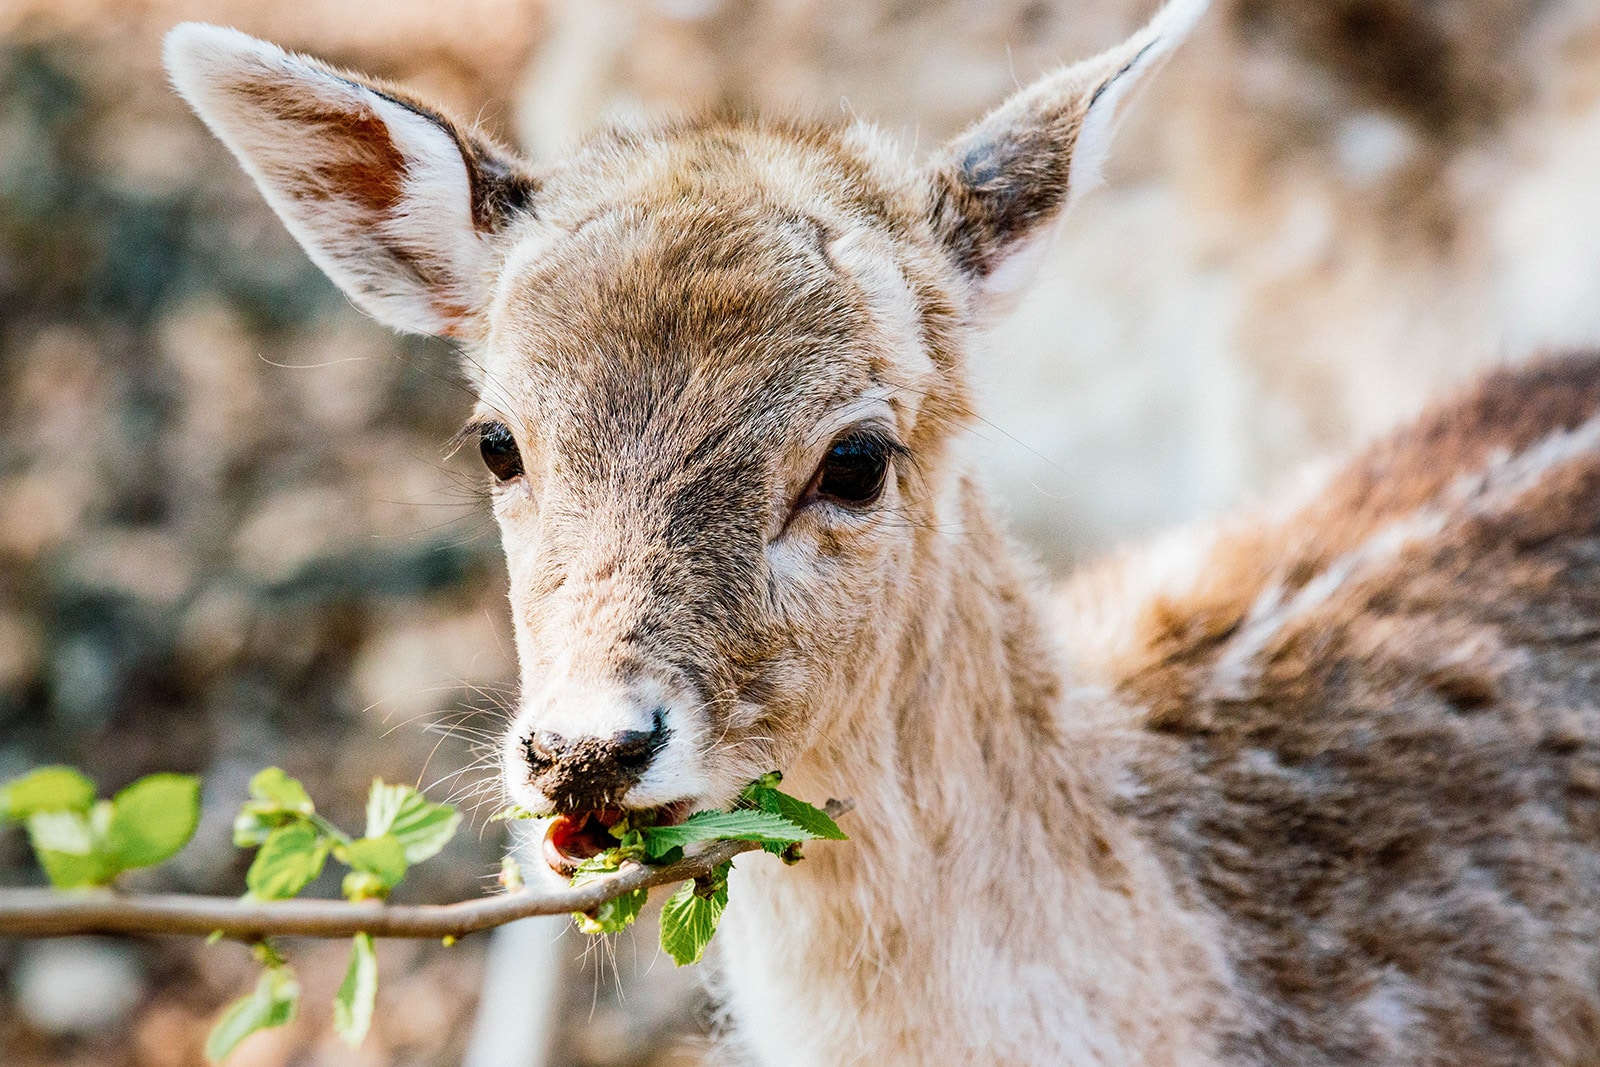 Deer nibbling on leaves from a shrub